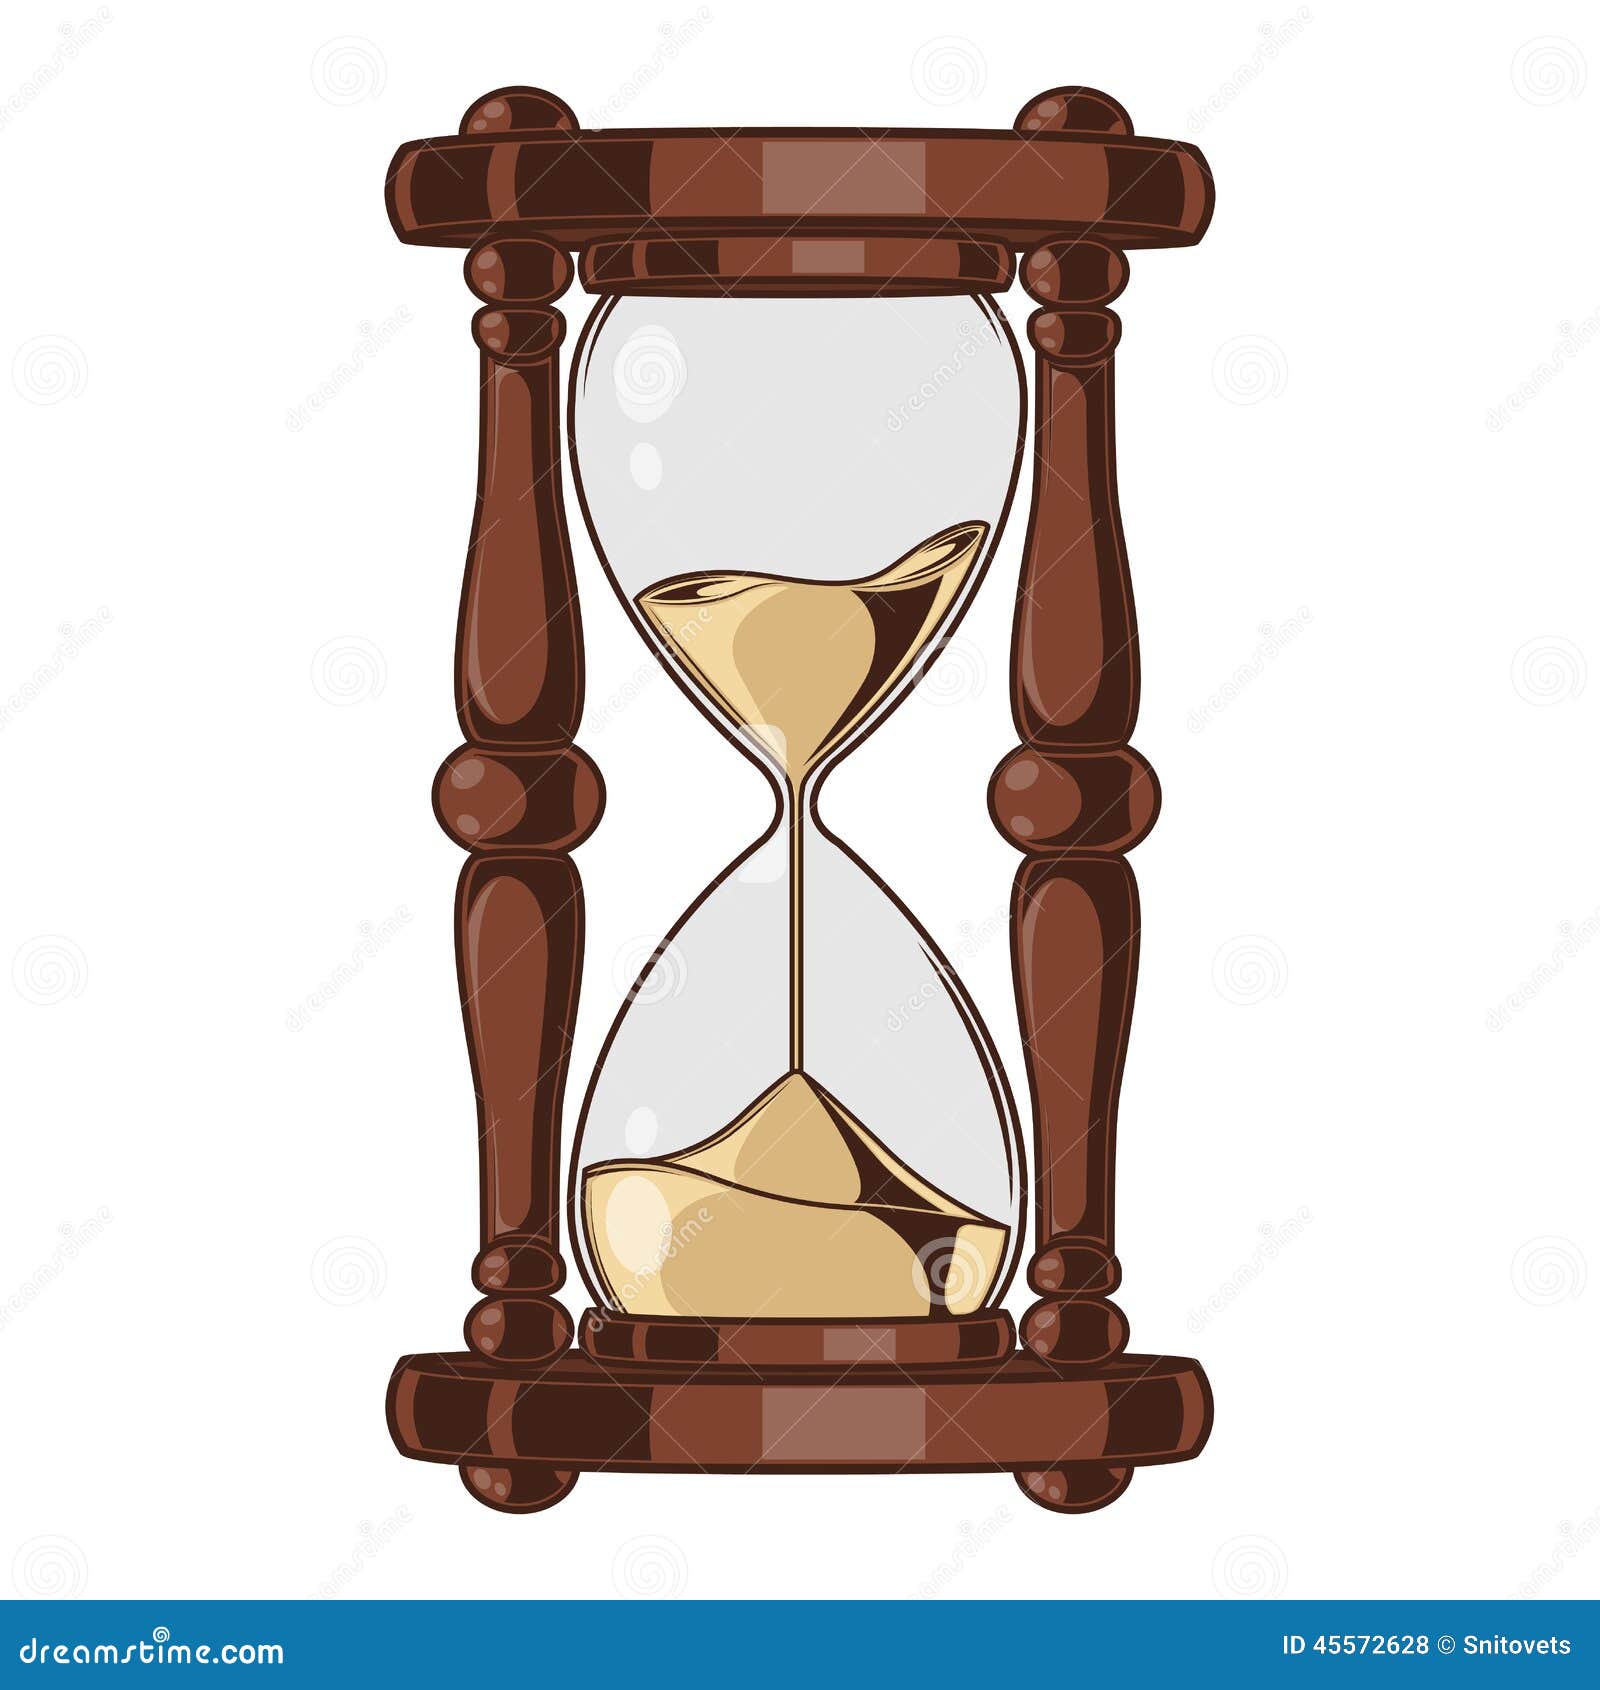 Antique Sand Hourglass Isolated On A White Background. Color Line Art. Retro Design ...1300 x 1390